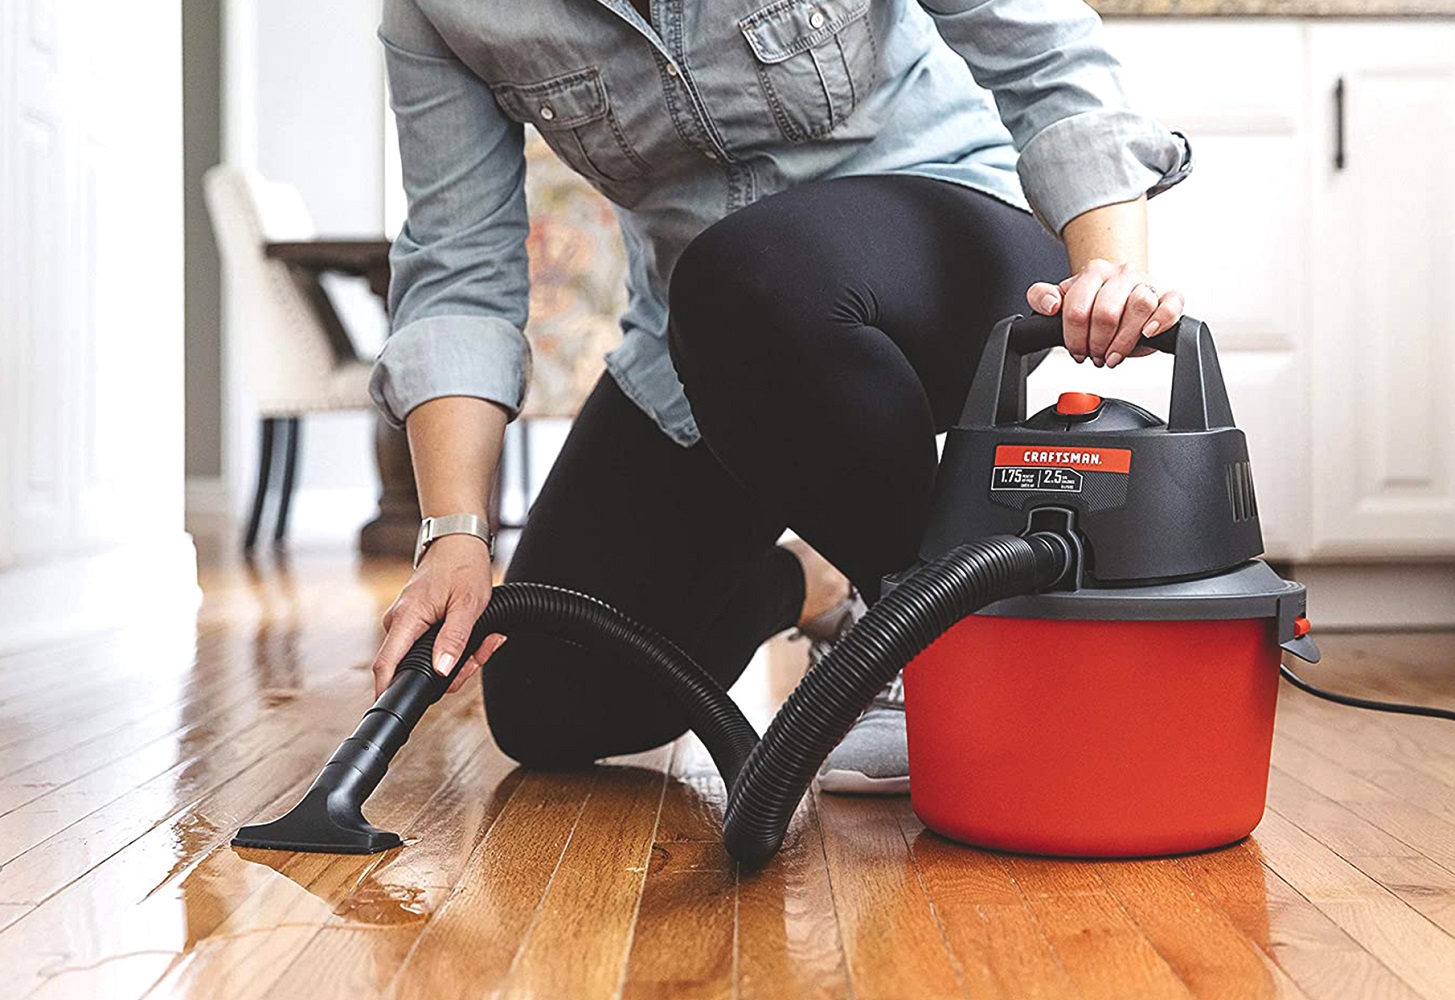 4 Best Wet/Dry Vacuums for May 2022 | Check Reviews